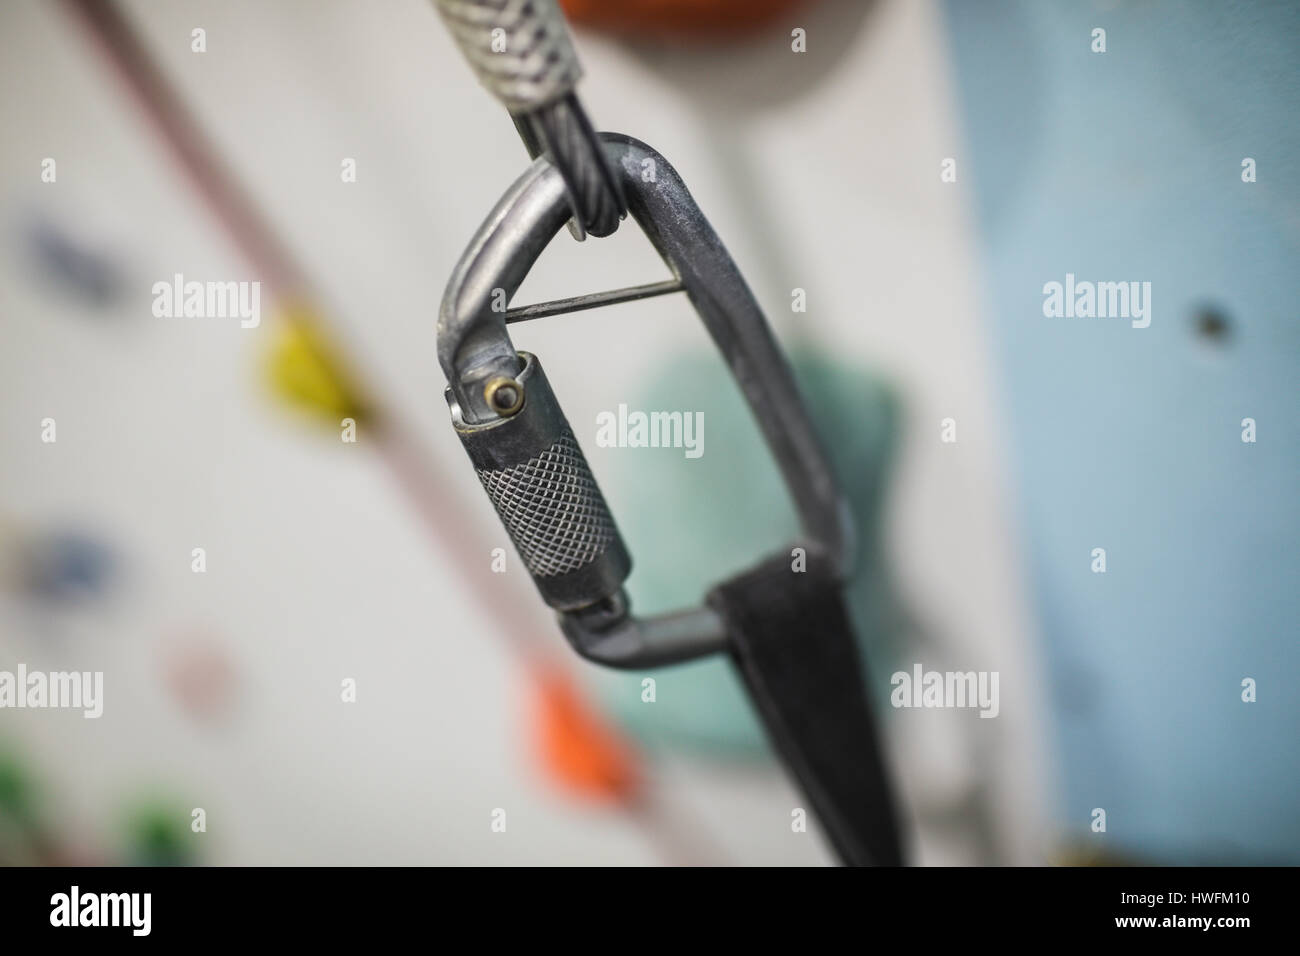 Close-up of carabiner hook on climbing artificial wall in gym Stock Photo